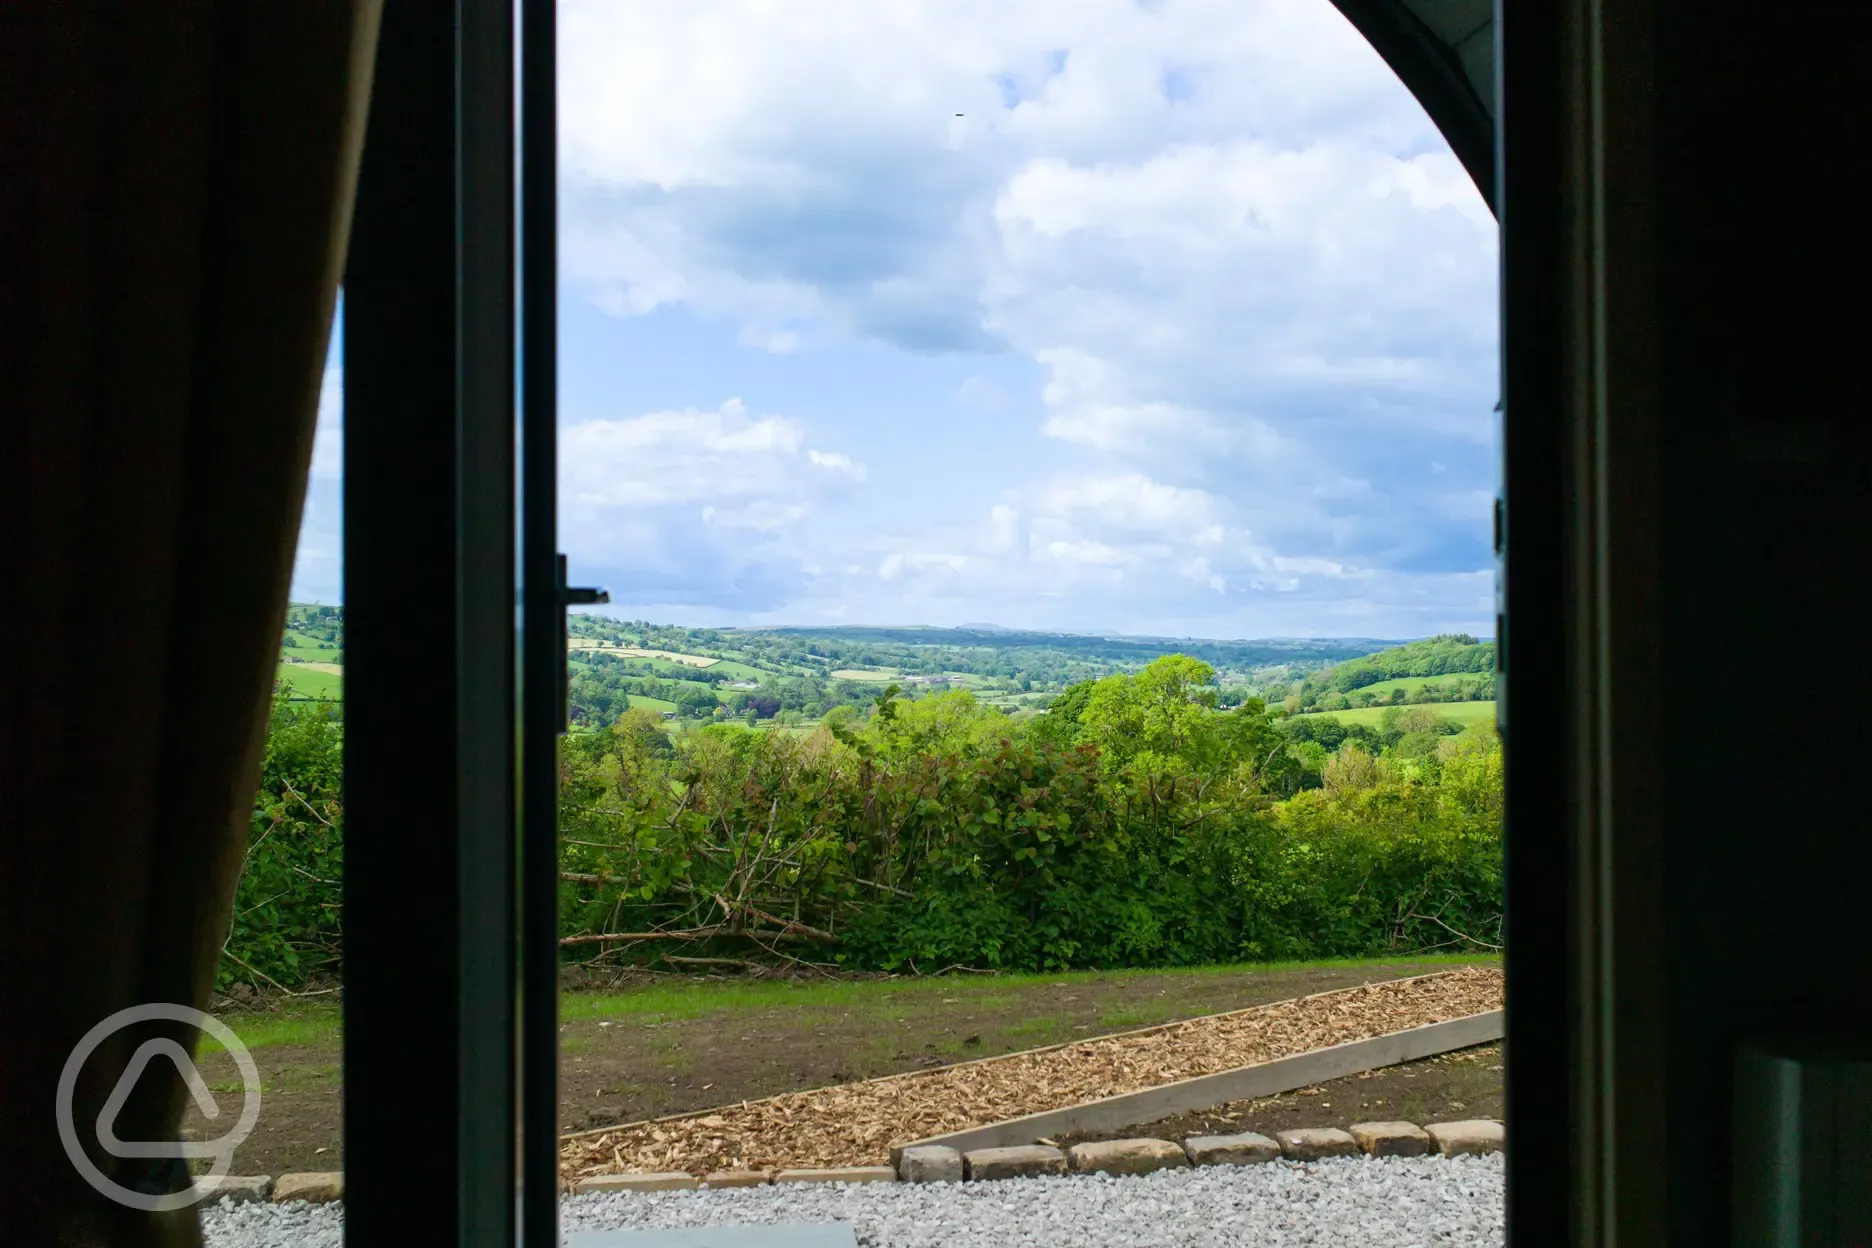 The view from inside the glamping pods